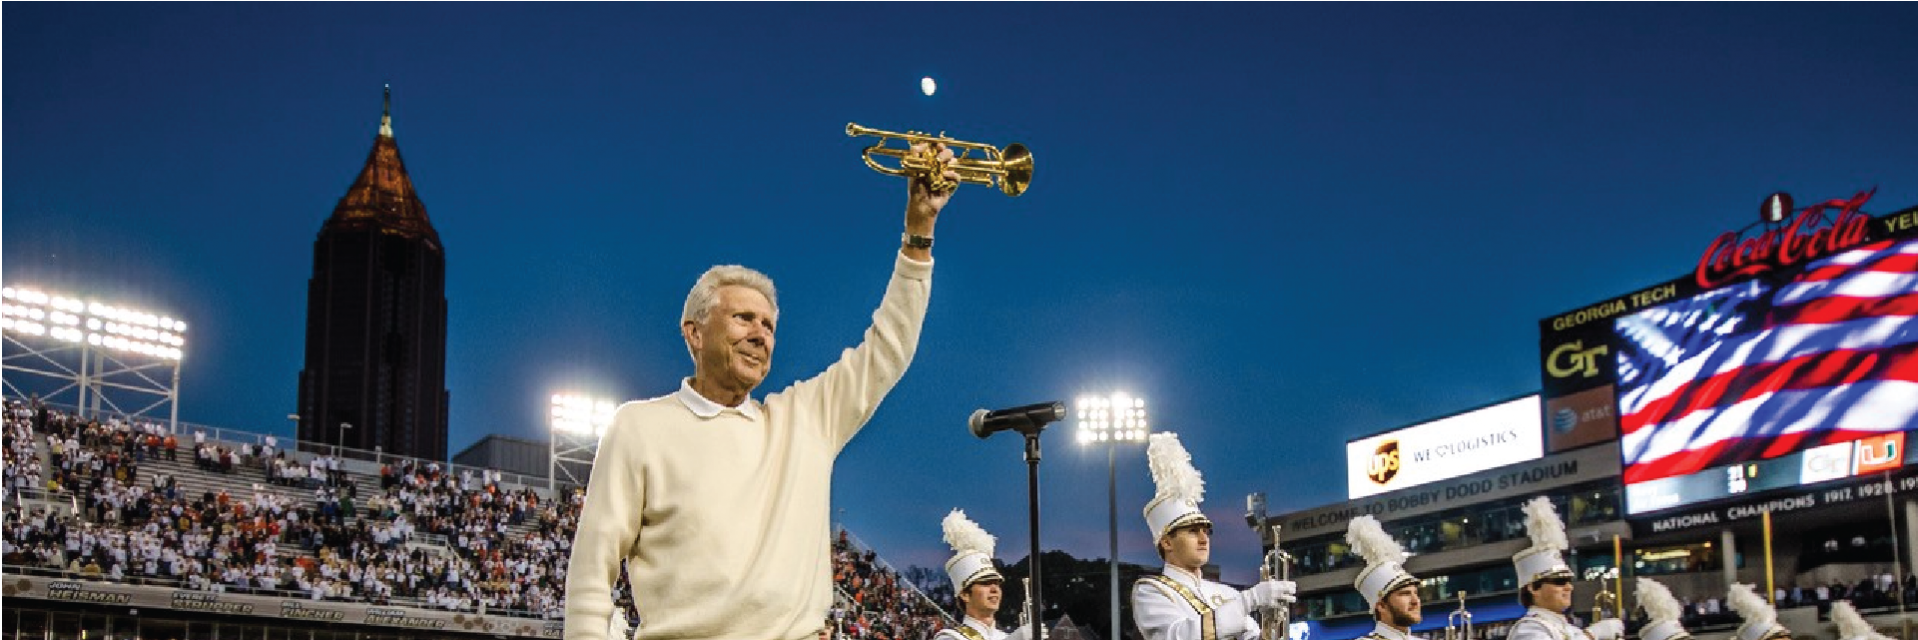 Cecil Welch holds his trumpet above his head in front of the marching band